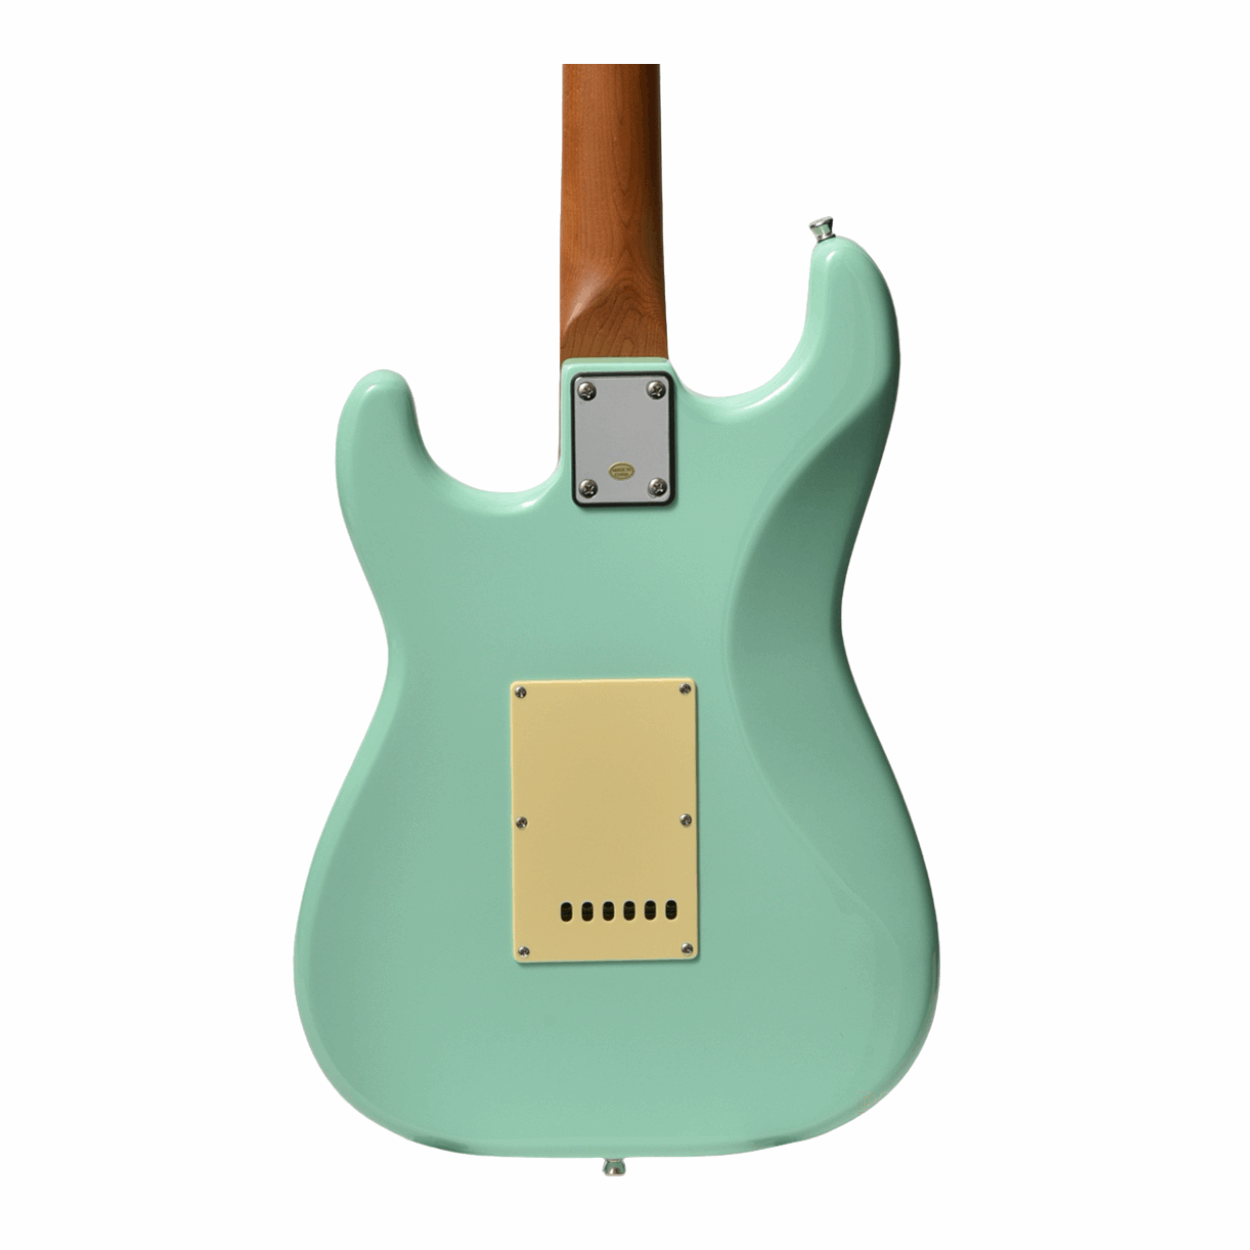 Bacchus Bst-2-rsm/m-sfg Universe Series Roasted Maple Electric Guitar, Seafoam Green With Bag